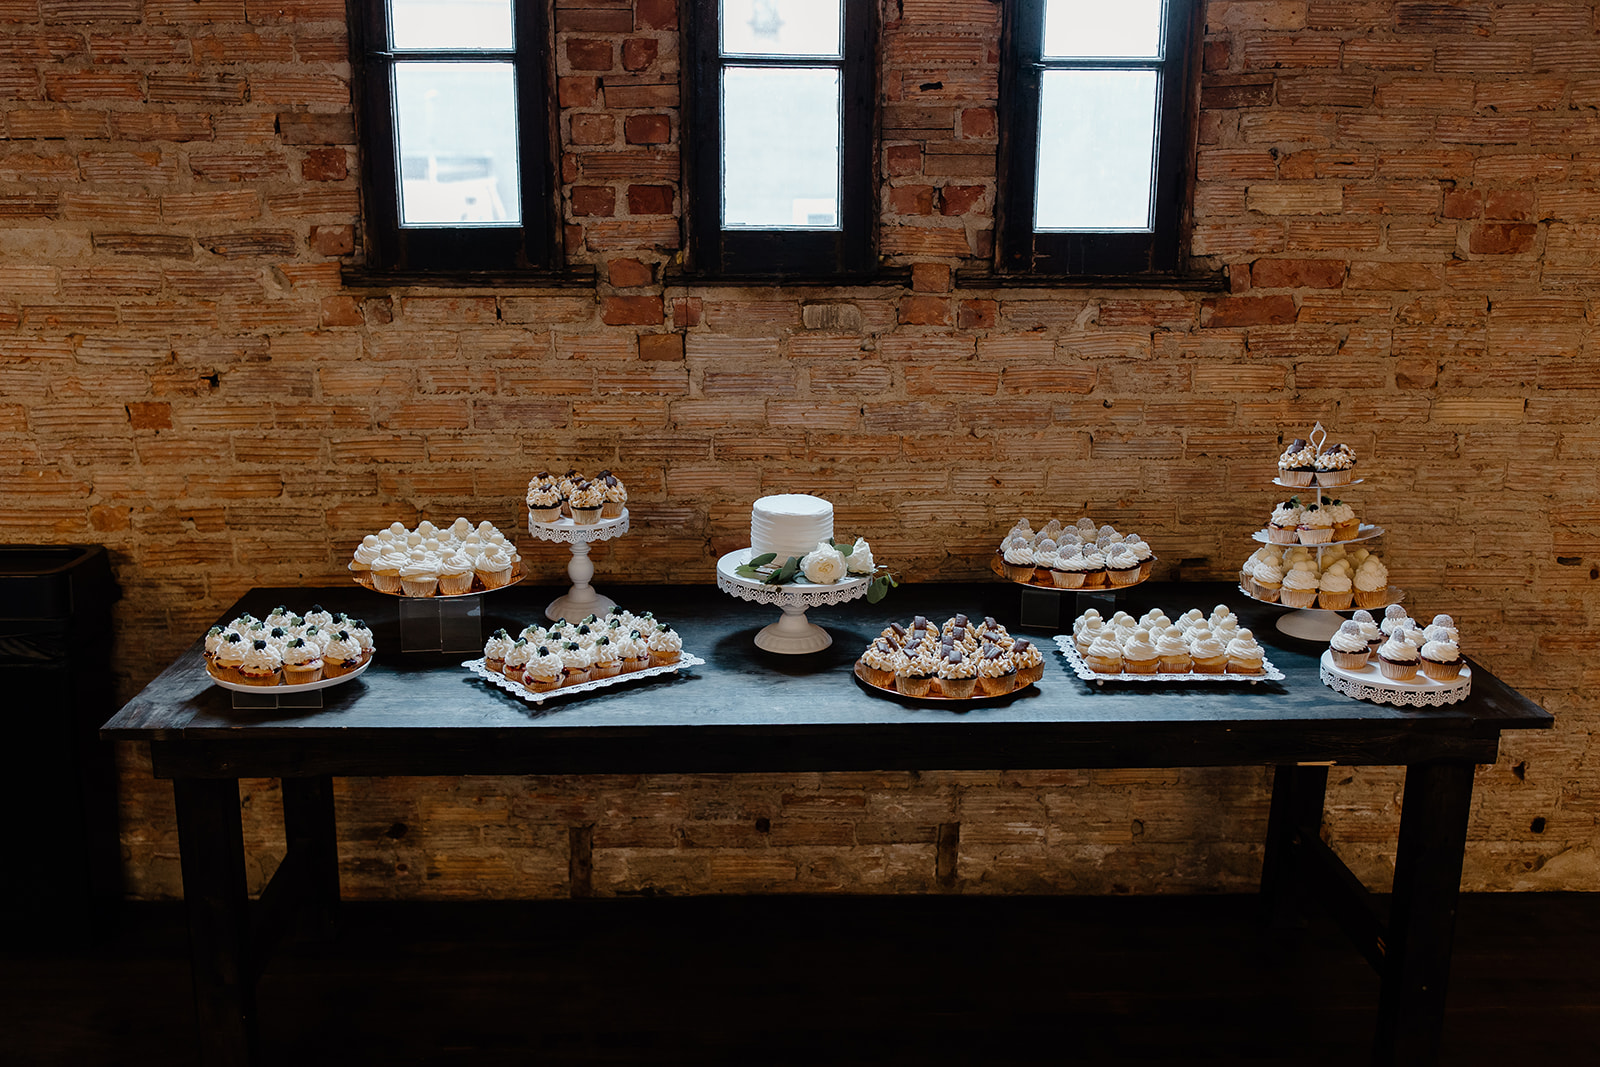 Dessert table full of cake, cupcakes, and other delicious treats. 